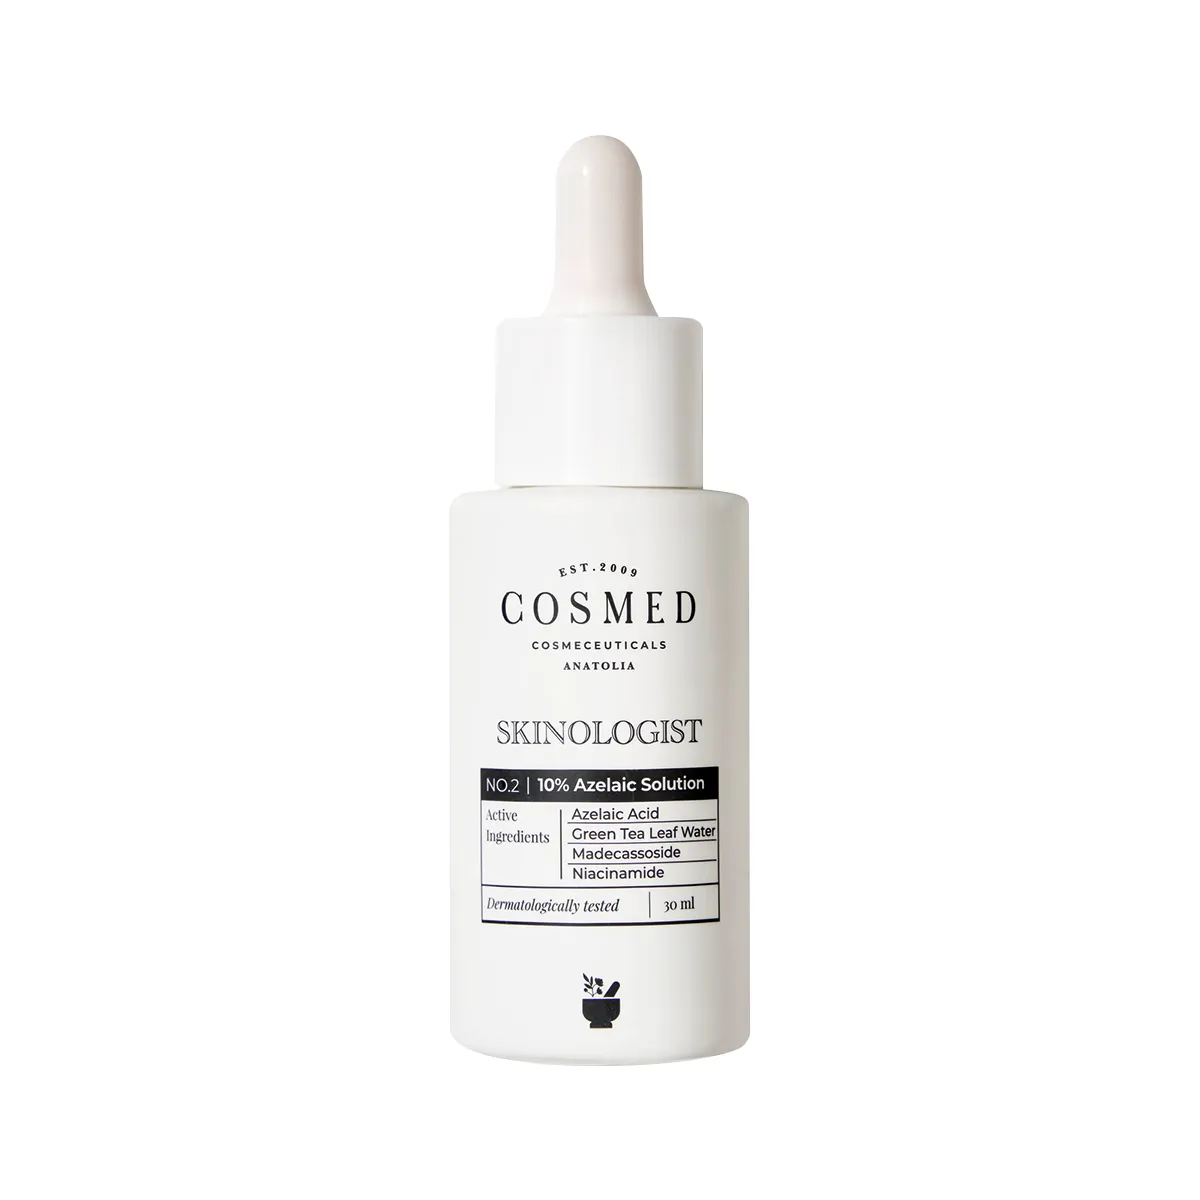 First product image of Cosmed Skinlogist Serum 30ml